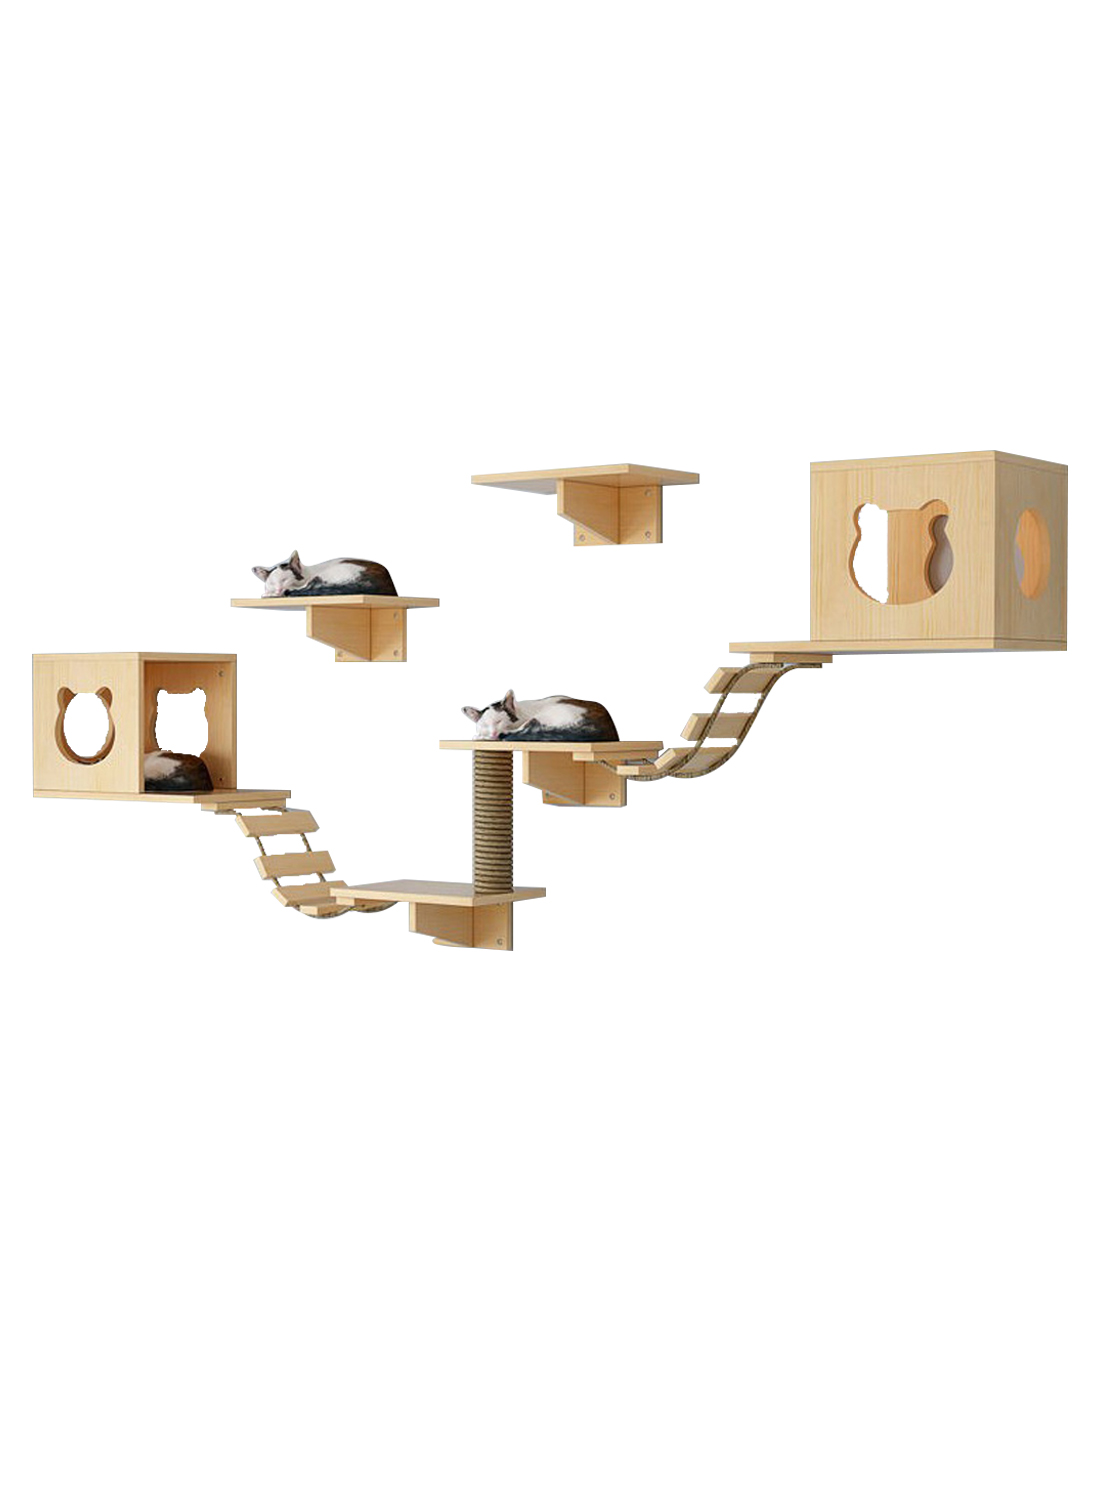 Premium Wall-Mounted Cat Playground  Unique Design with 2 Nests &amp; Platforms Soft Steps Wider Perches &amp; Scratch Column